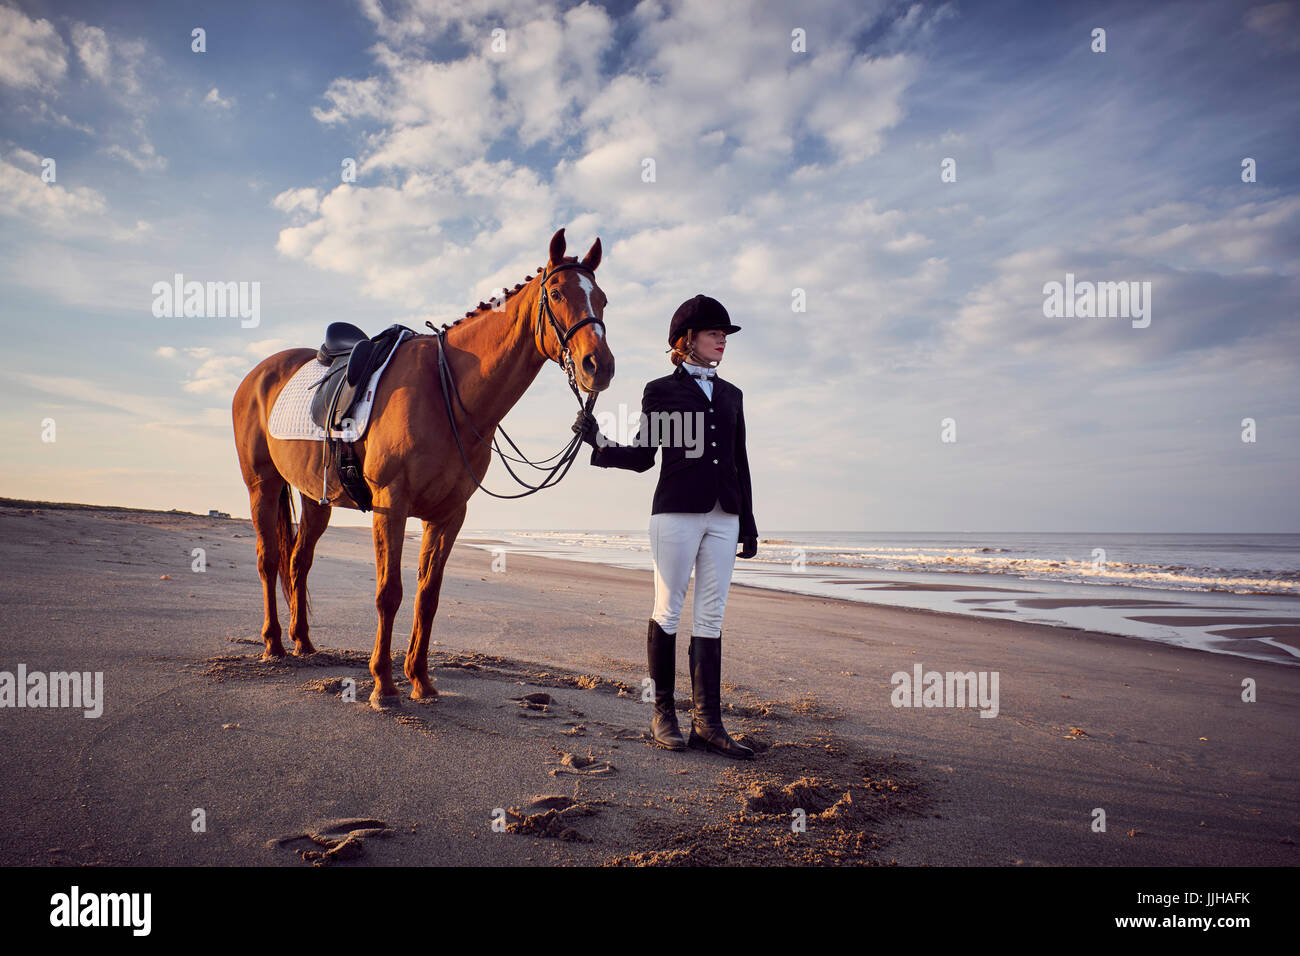 A young woman standing with her horse on the beach. Stock Photo